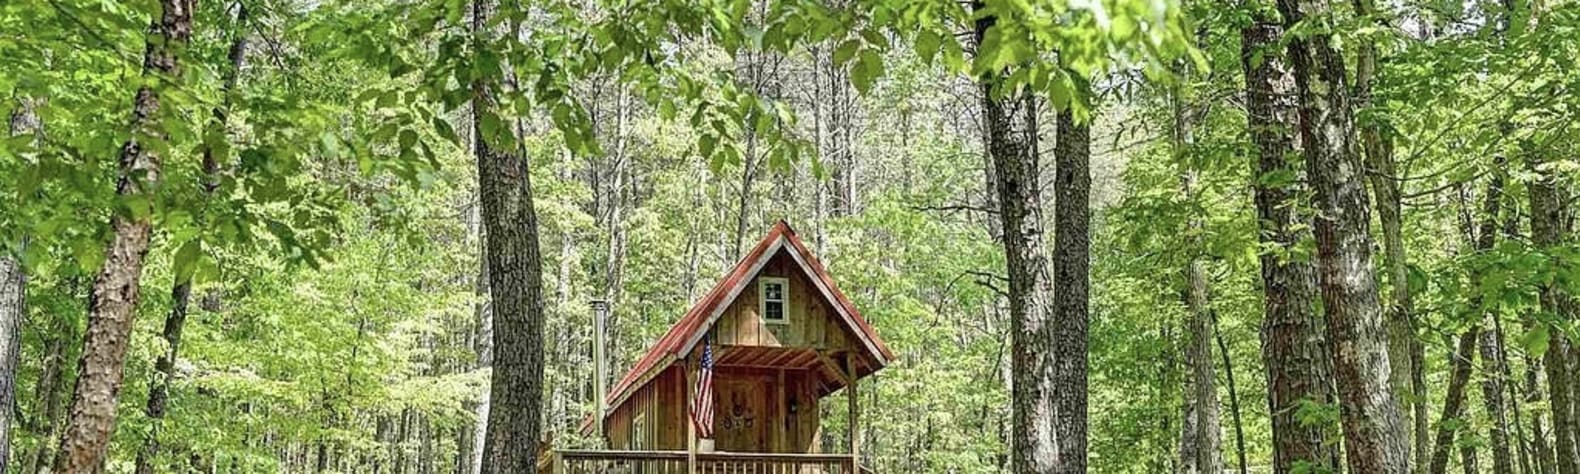 Twin Springs Tiny House